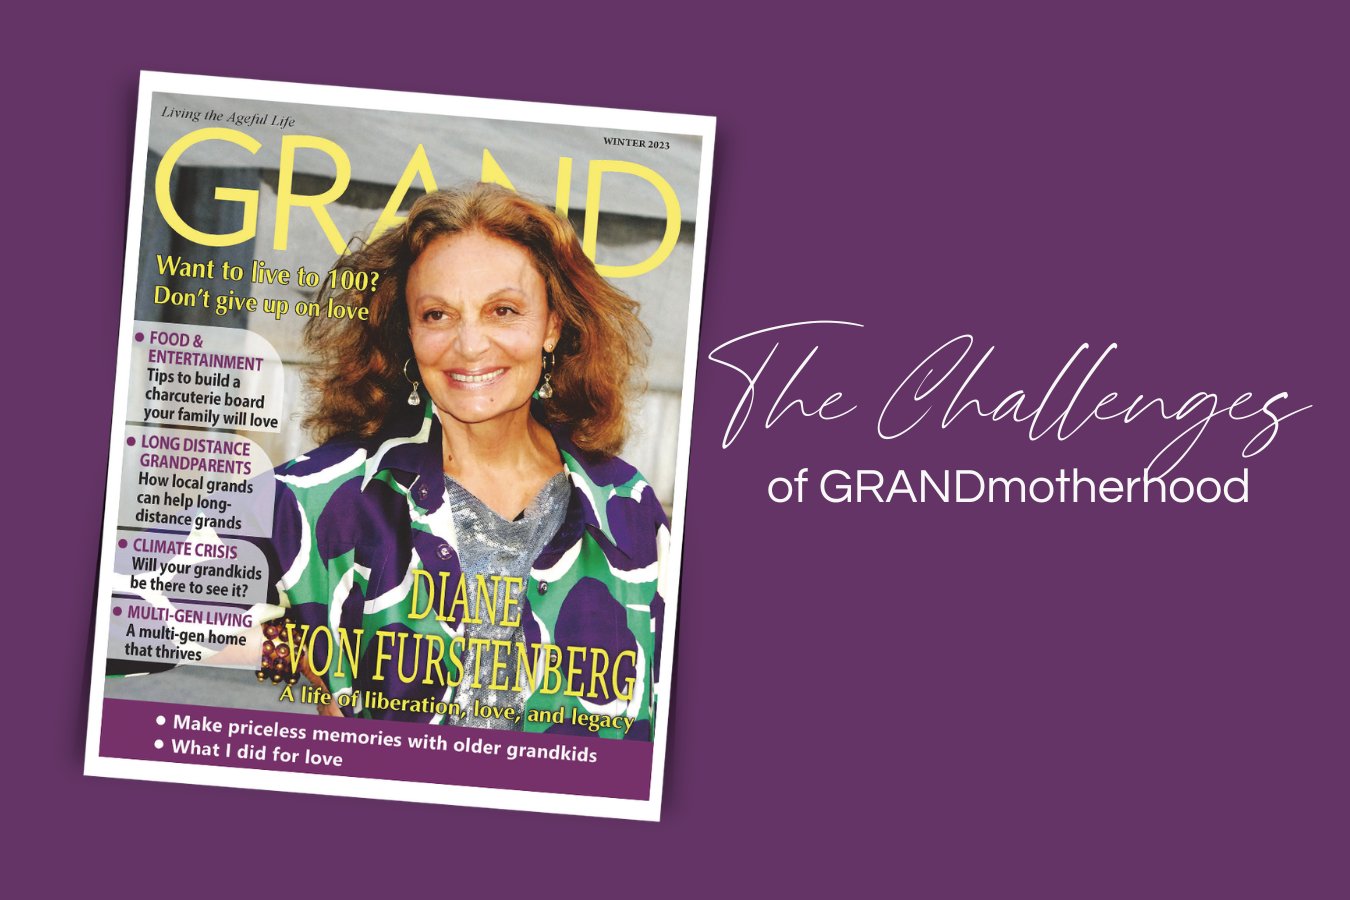 the challenges of Grandmotherhood, article written by Christine Crosby